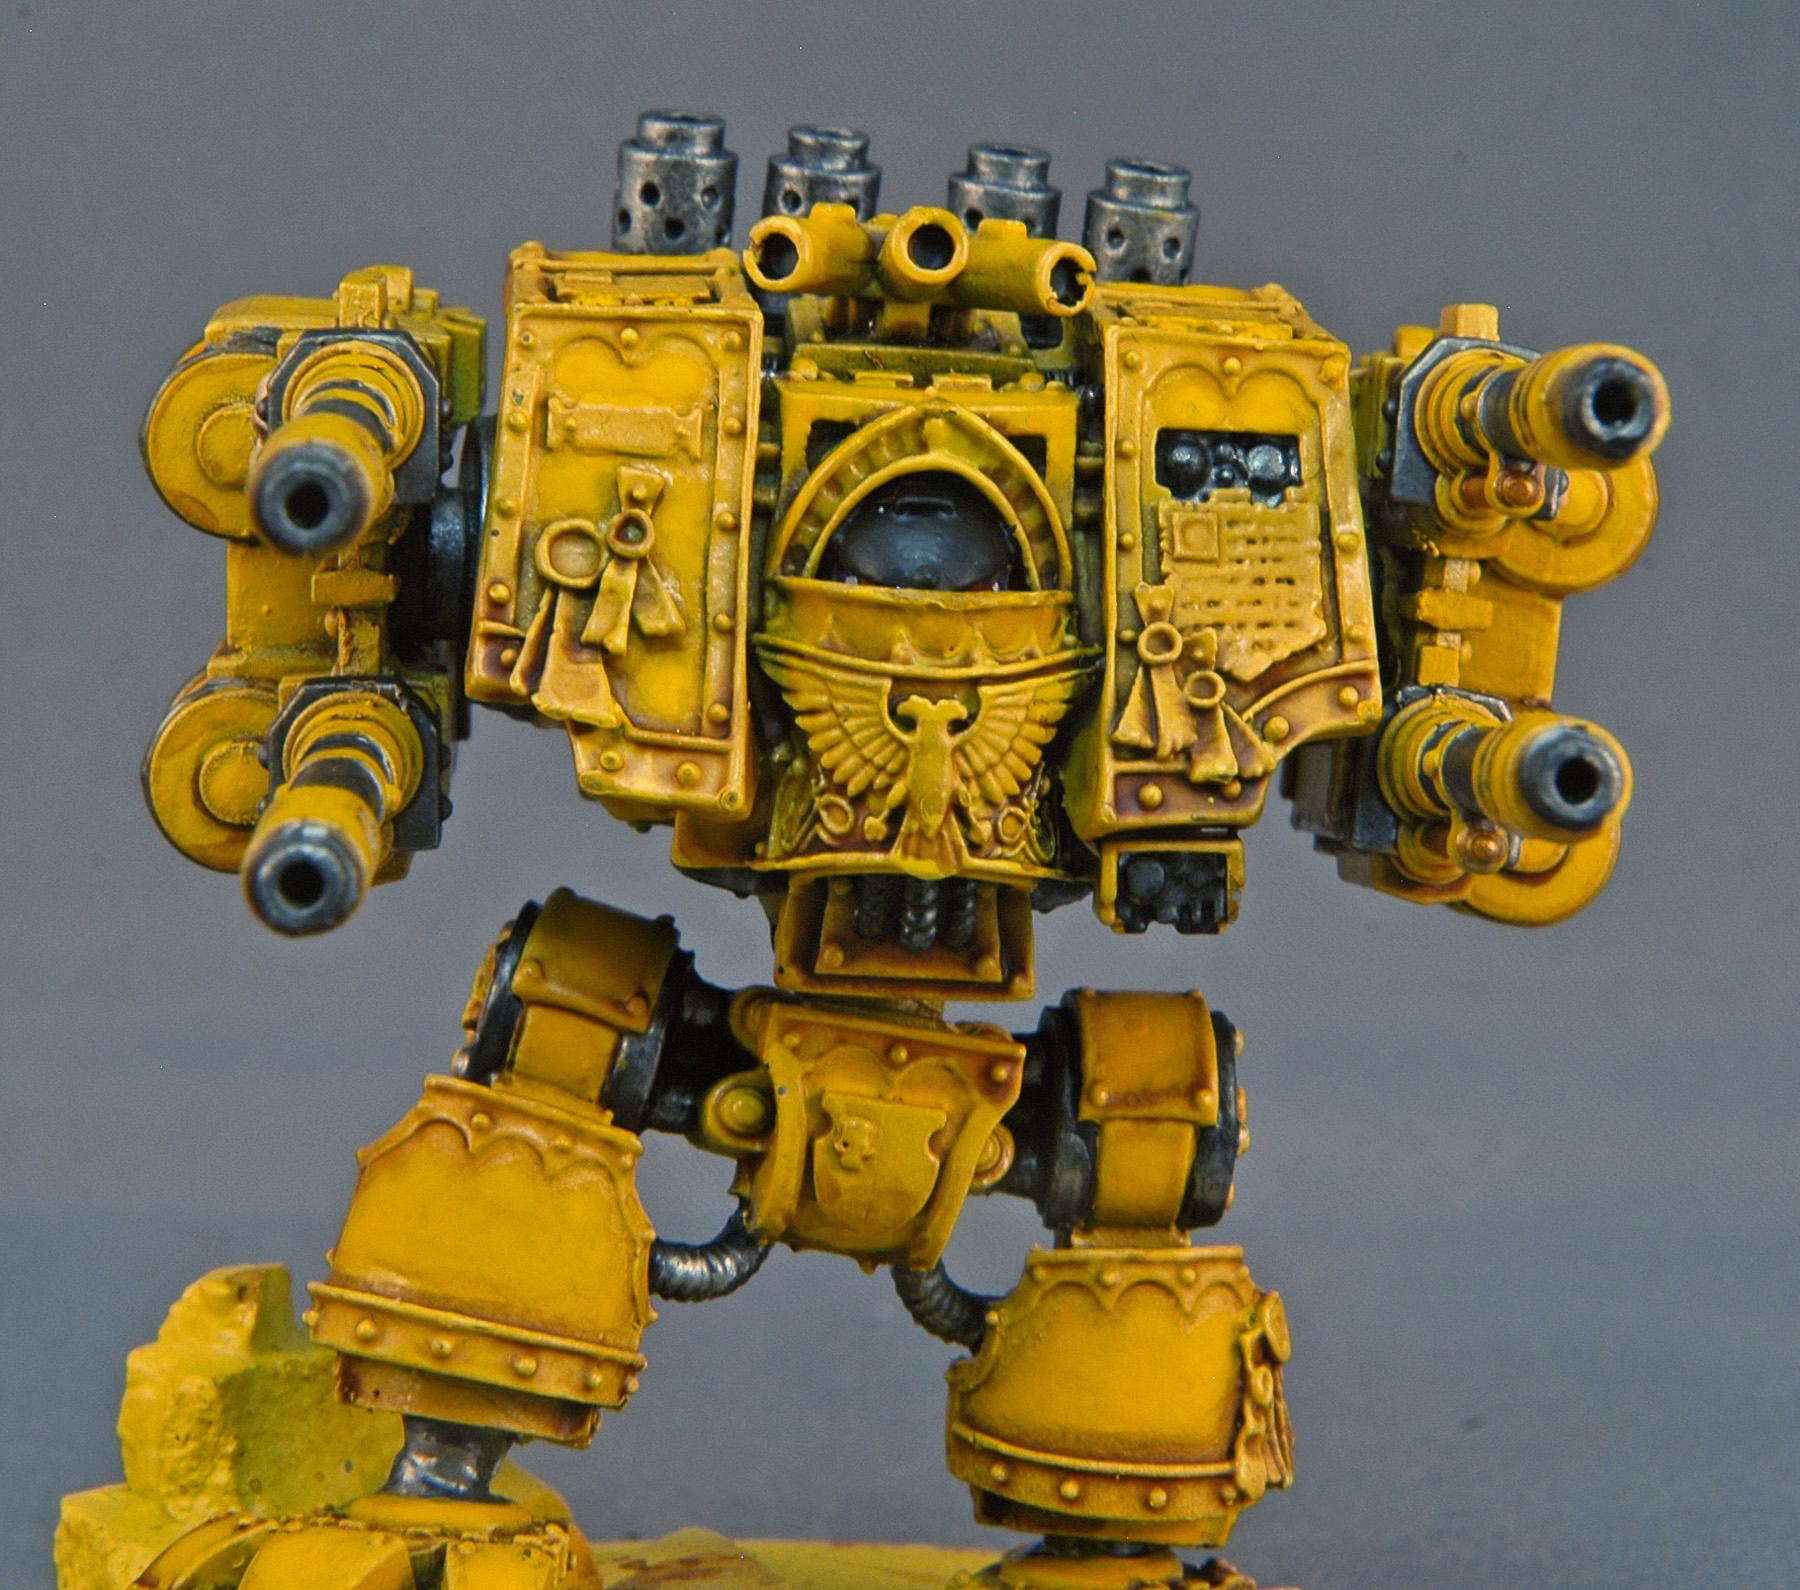 Autocannons, Dreadnought, Mantis Warriors, Rifleman, Space Marines, Tranquility, Venerable, Warhammer 40,000